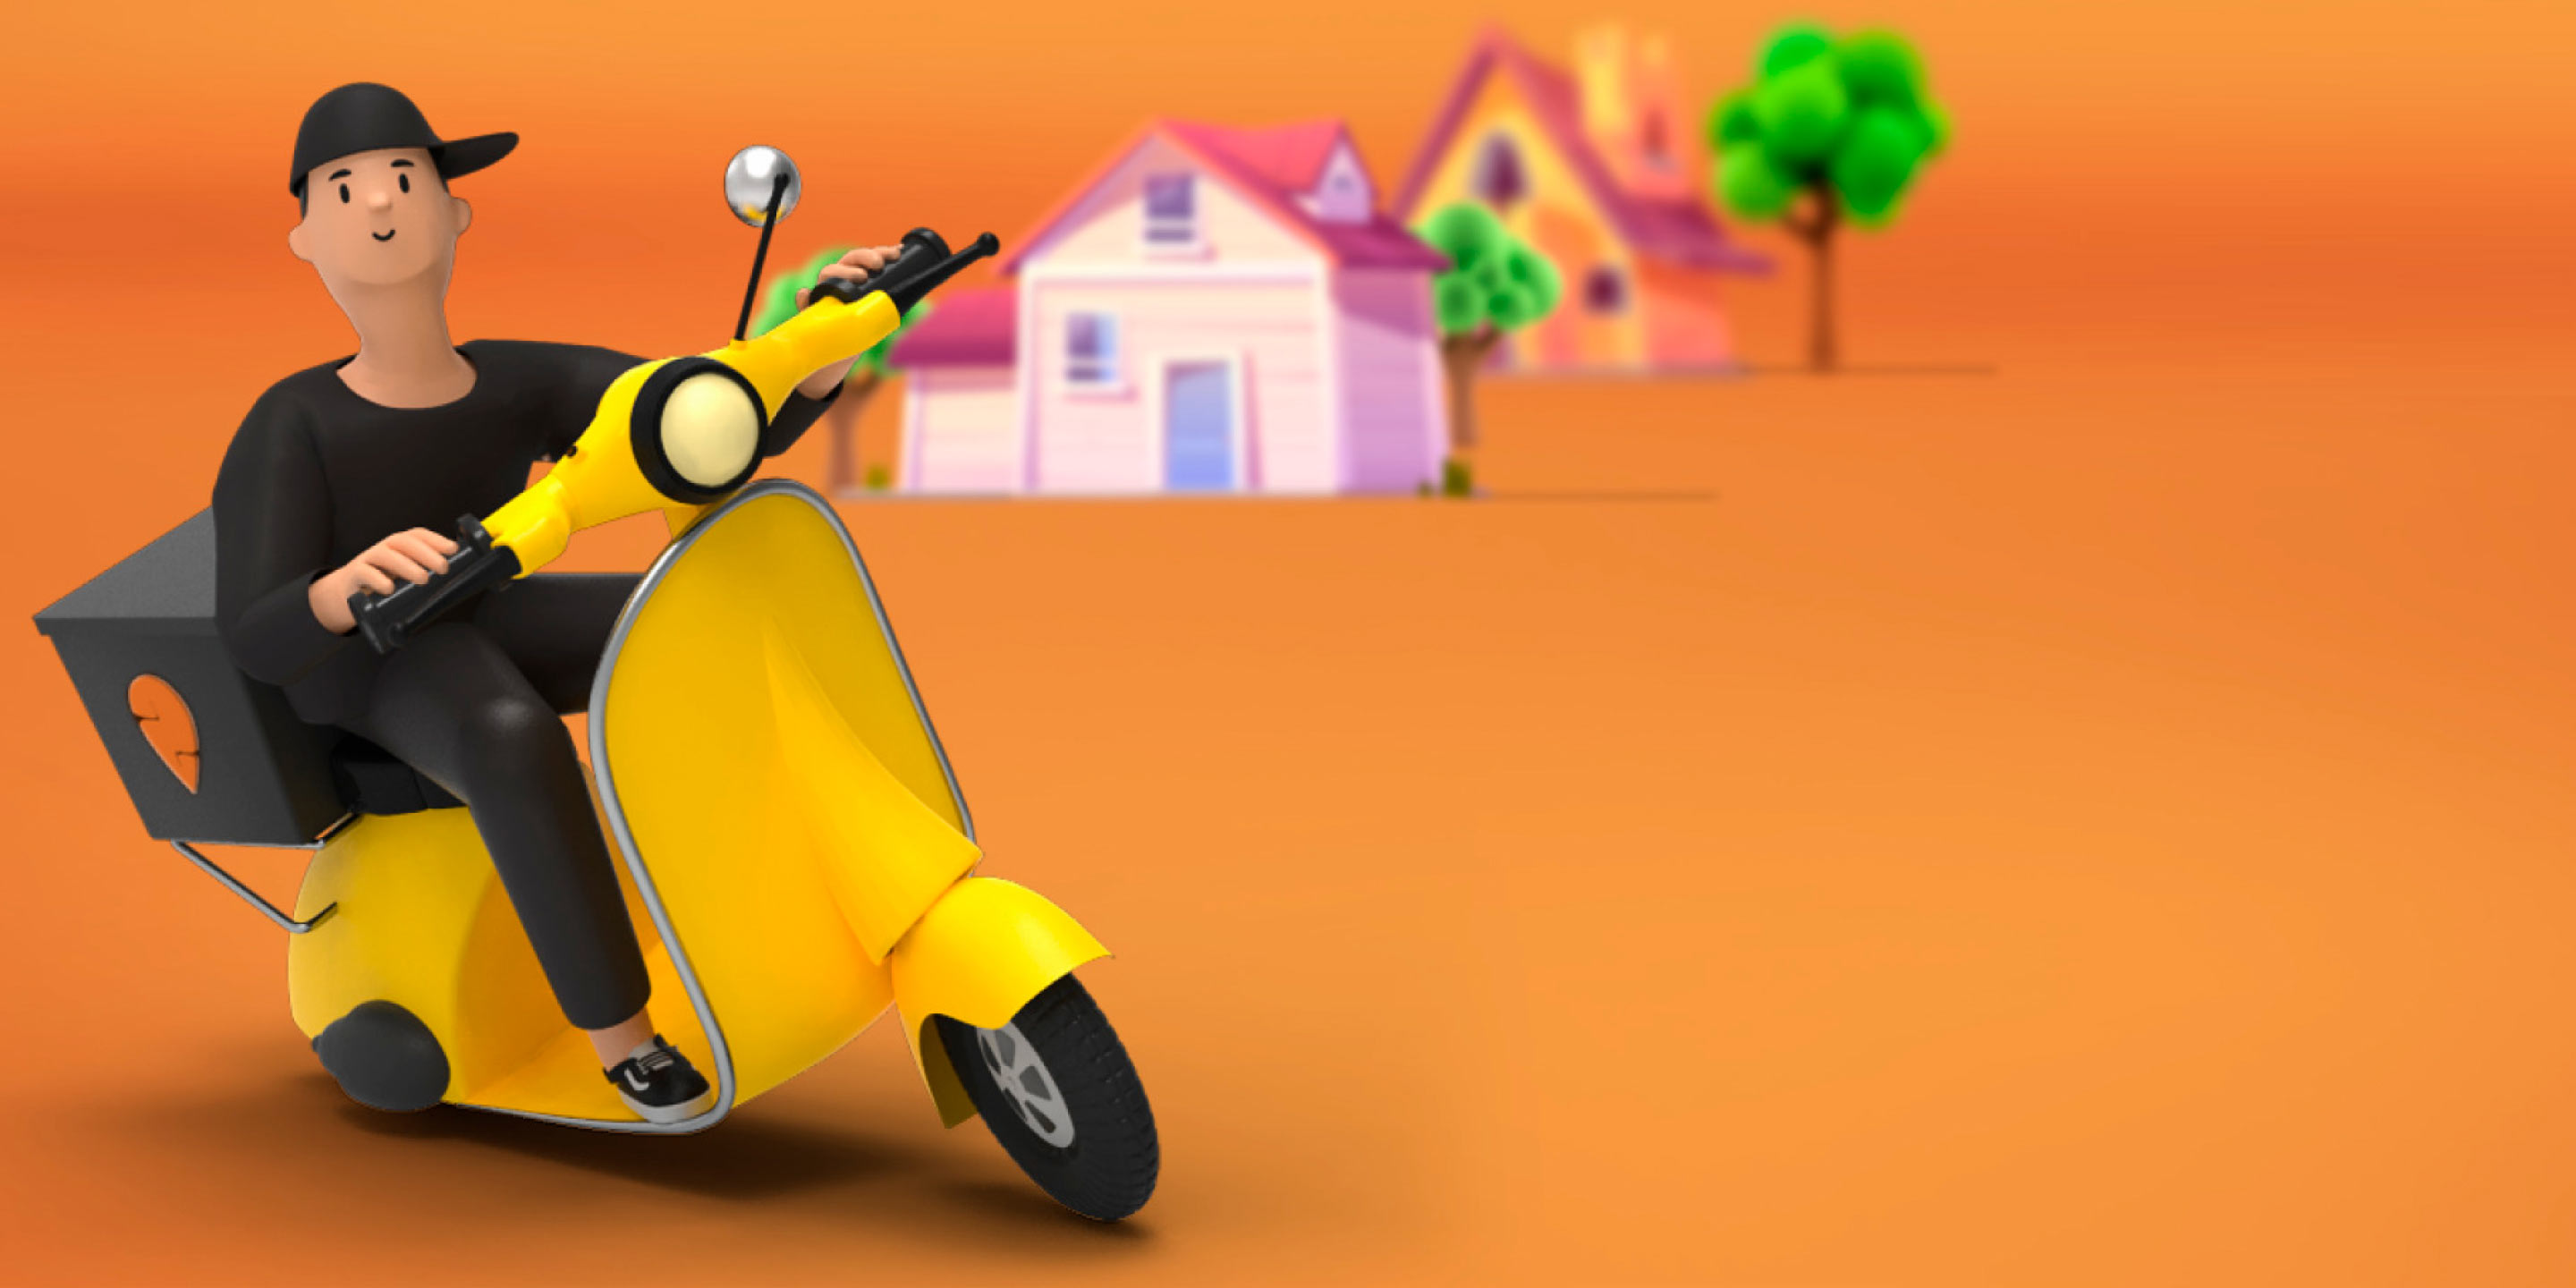 Swiggy promotional image of a person on a scooter